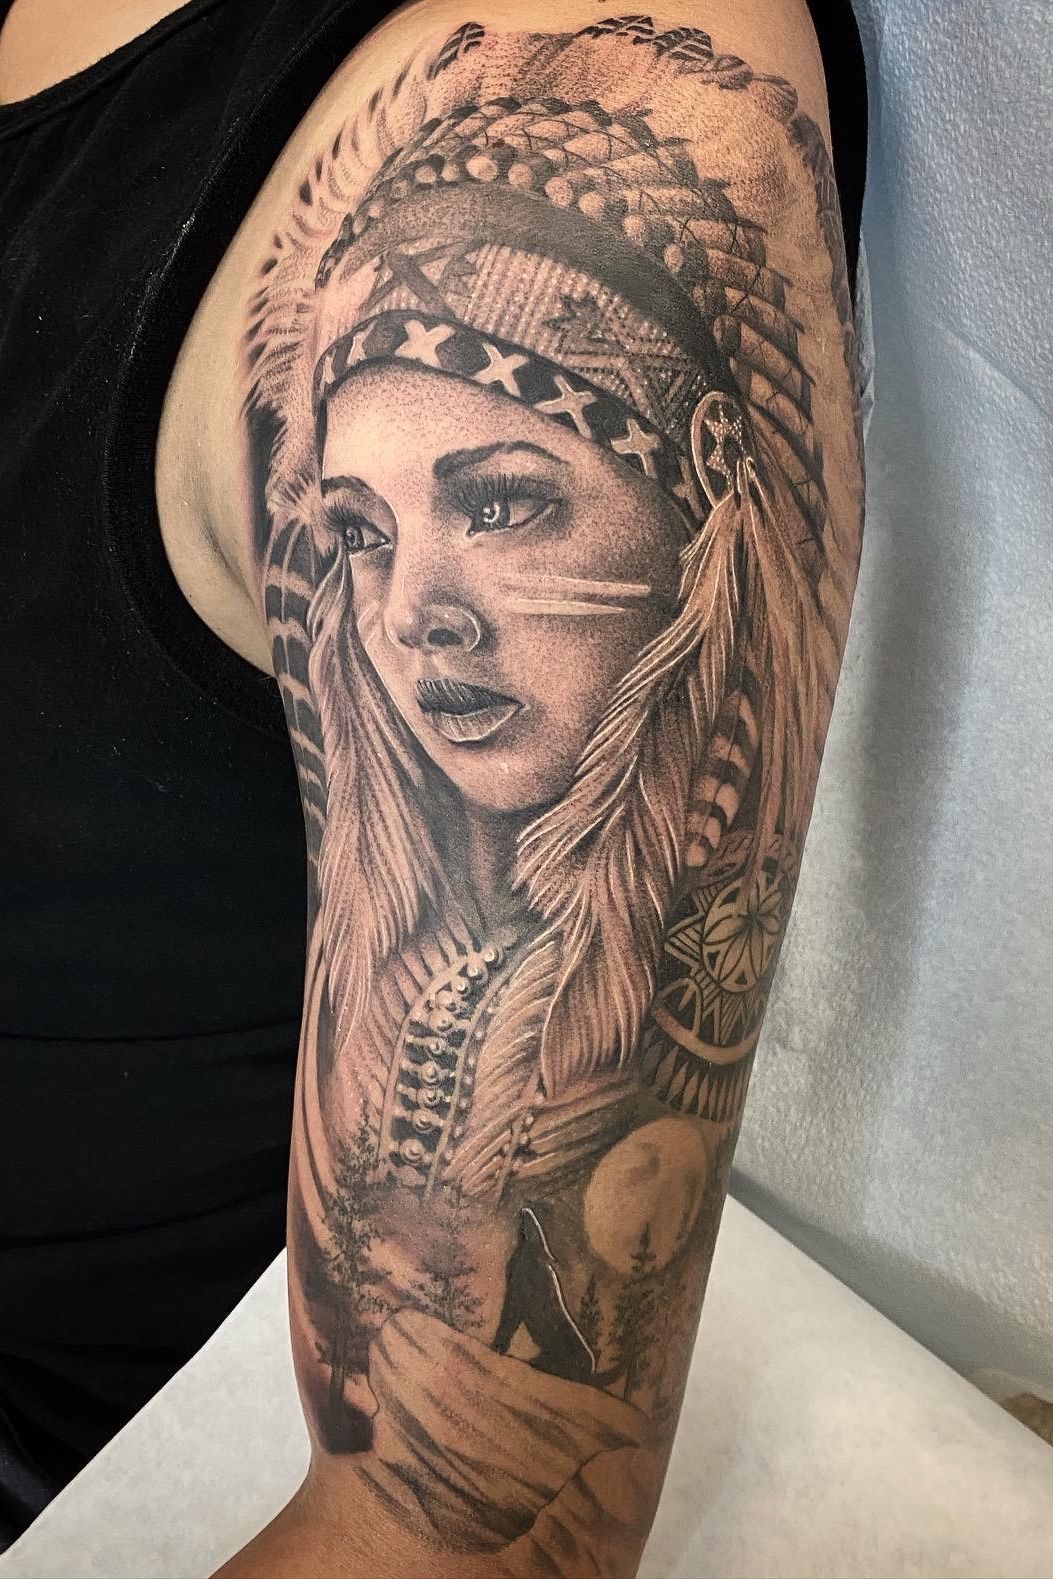 Tattoo uploaded by Justin JP Param • Native American half sleeve for a  first timer. Looking to do more liner stipple shaded pieces. #peaces  #blackandgrey #nativetattoo #girlportrait #dankubin #v7 #empireinks  #dynamicink #tattoolovers #